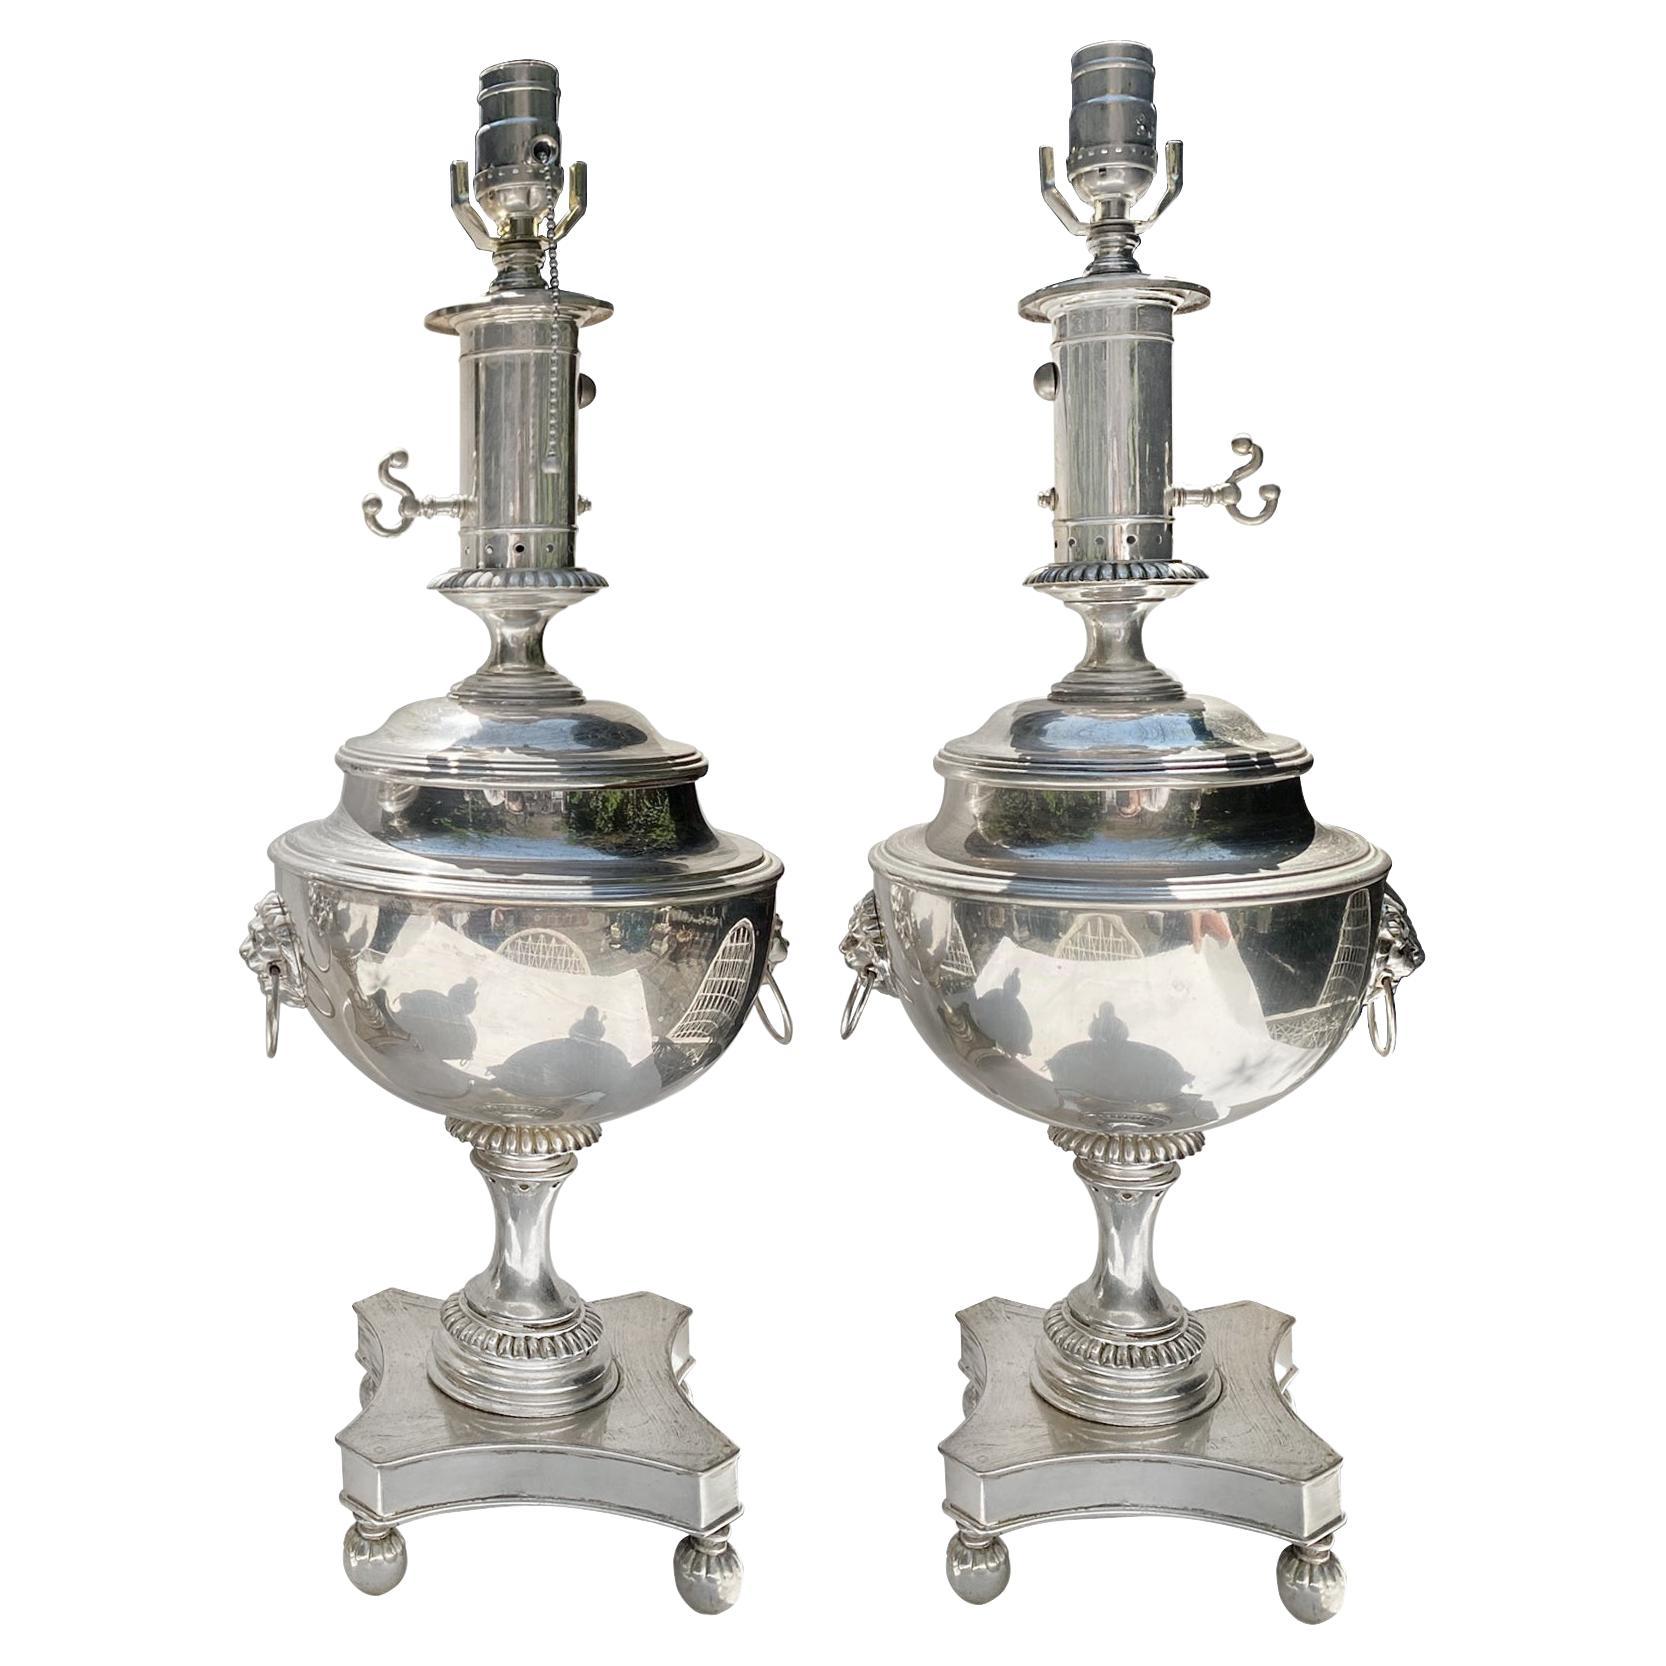 Antique Neoclassic Silver Plated Table Lamps